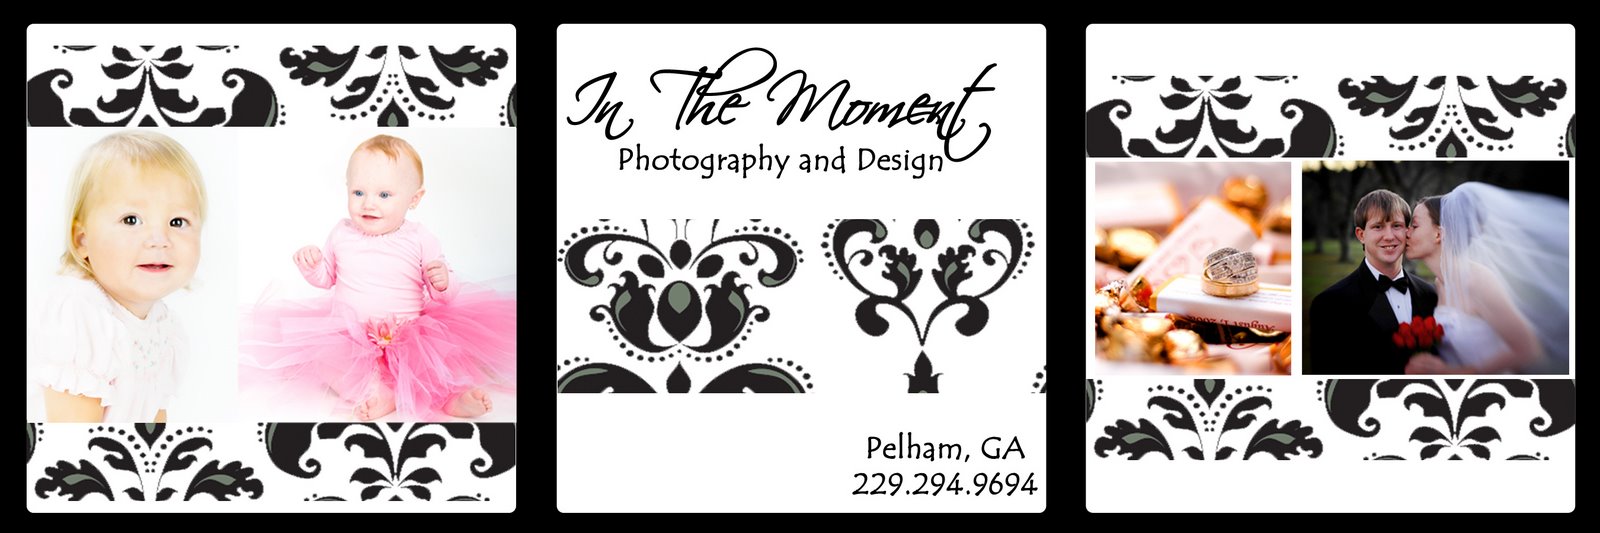 In the Moment Photography and Design